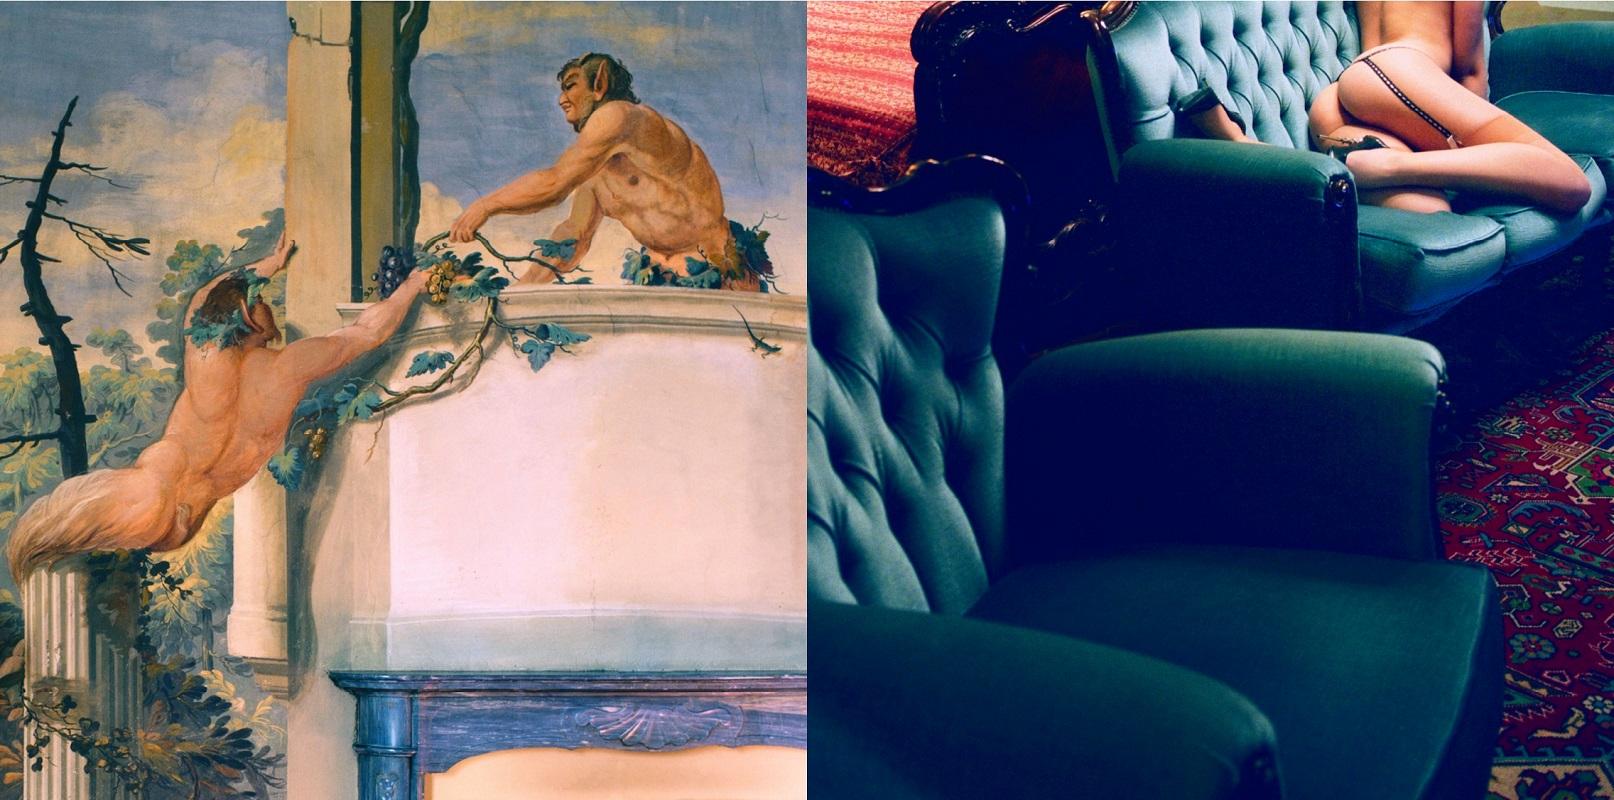 Guido Argentini Color Photograph - Diptychon: Prelude to love, nude woman on sofa with heels and painting 